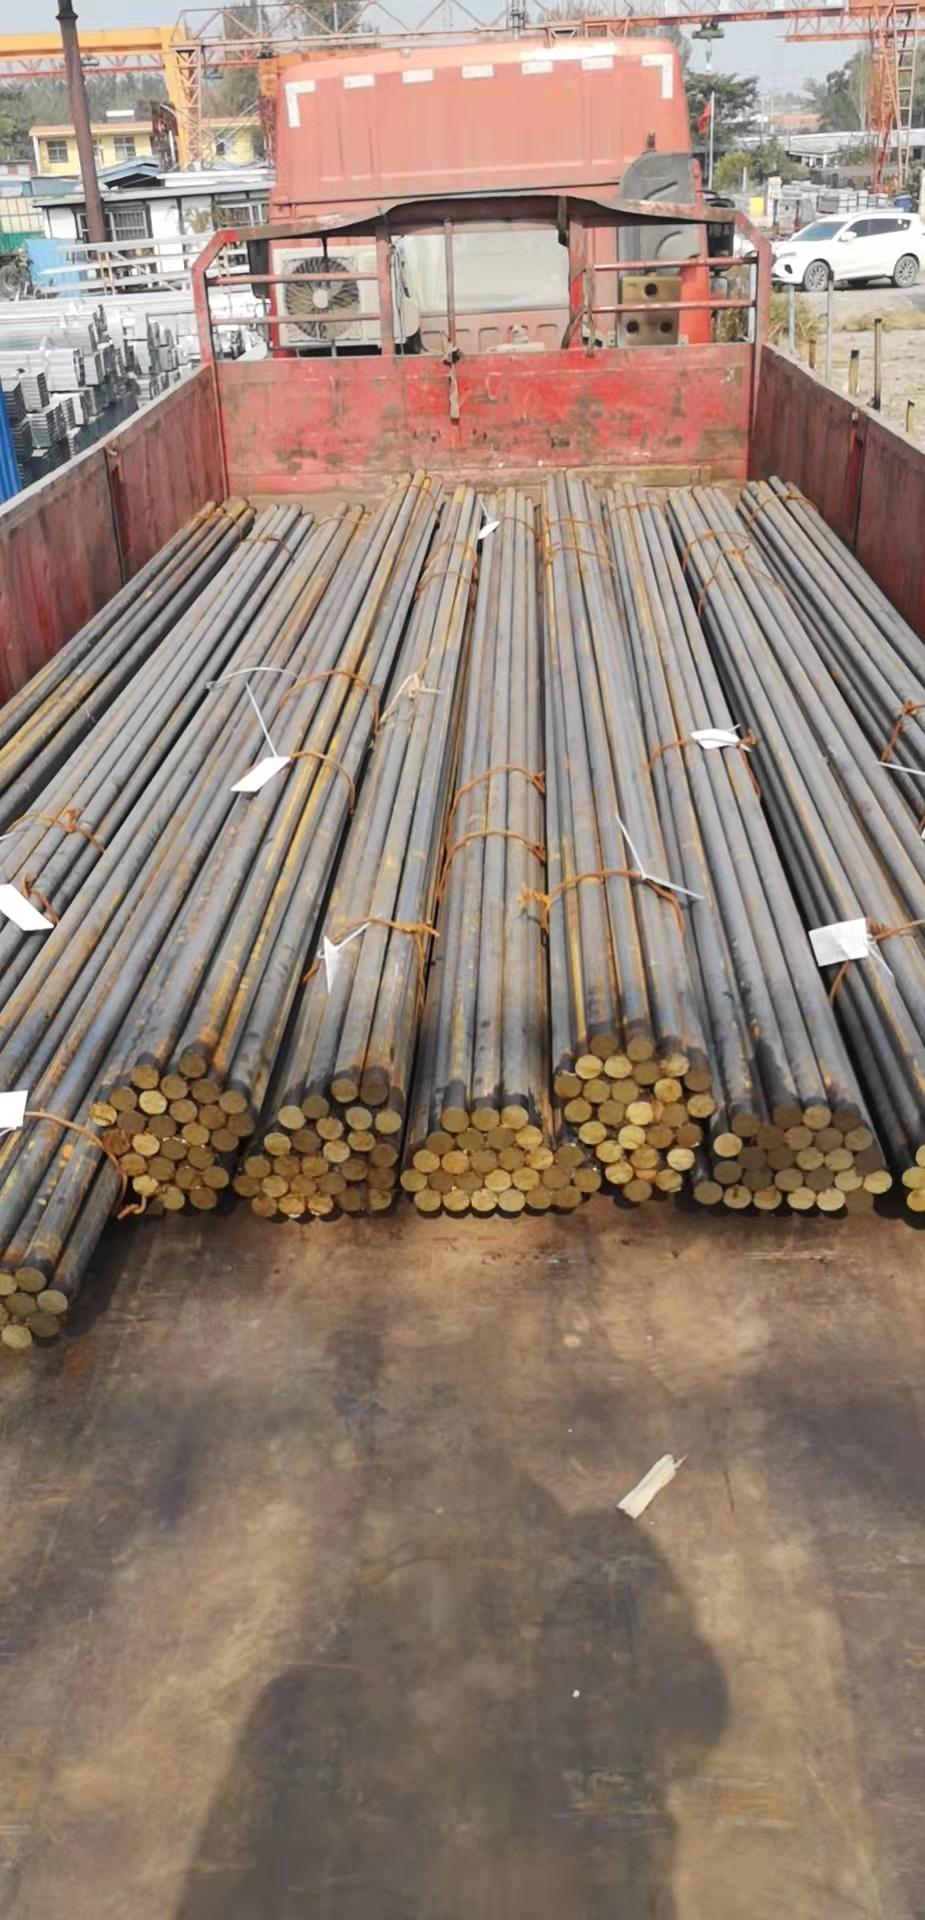 Prime Quality Q235 AISI Ss400 S20c S45c Hot Rolled Round Steel Bar